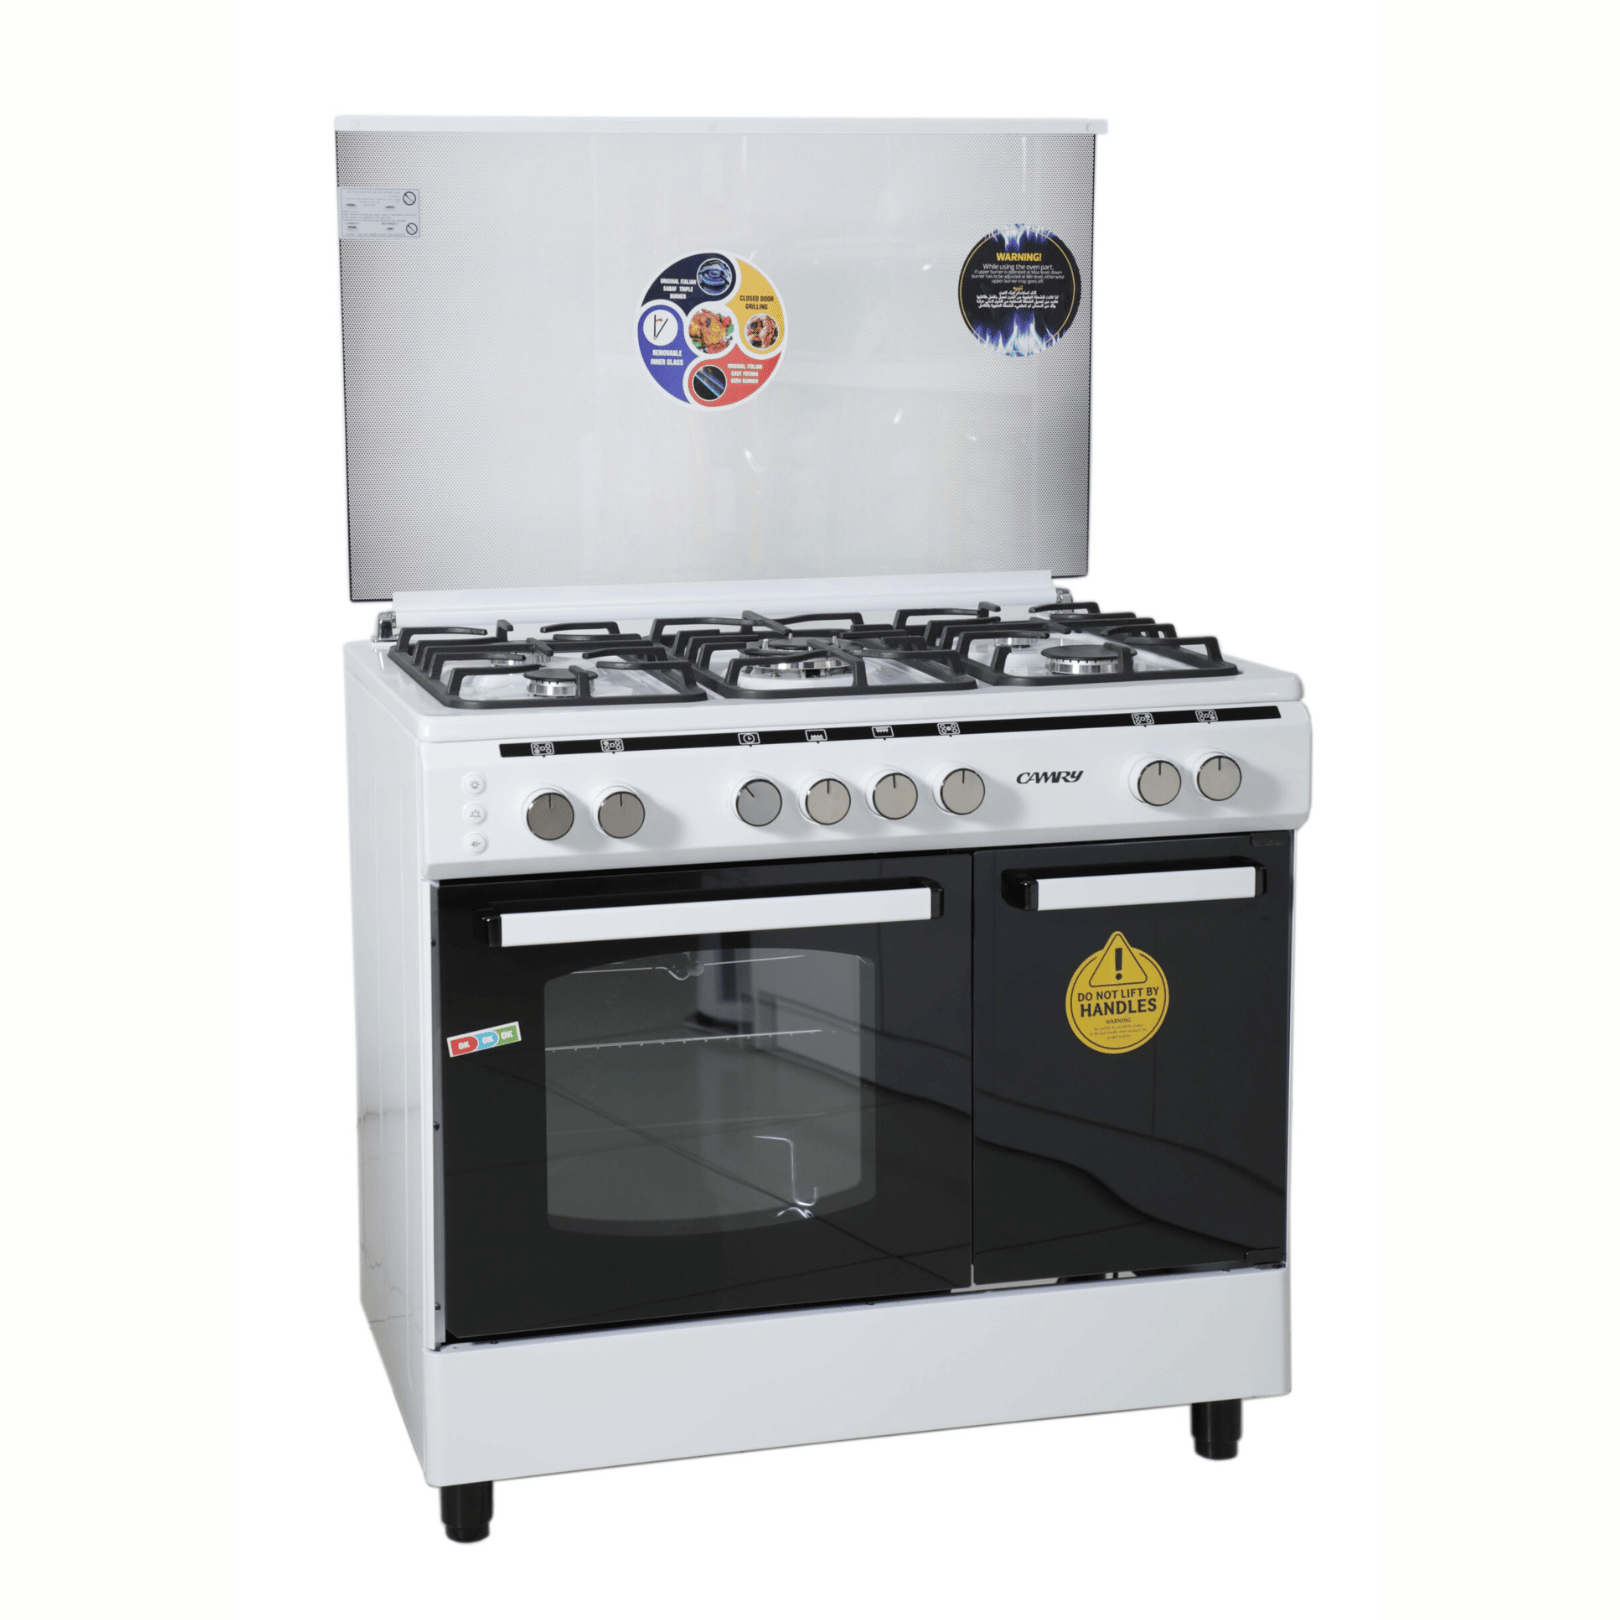 CAMRY FREE STANDING OVEN CY-FOB905WH